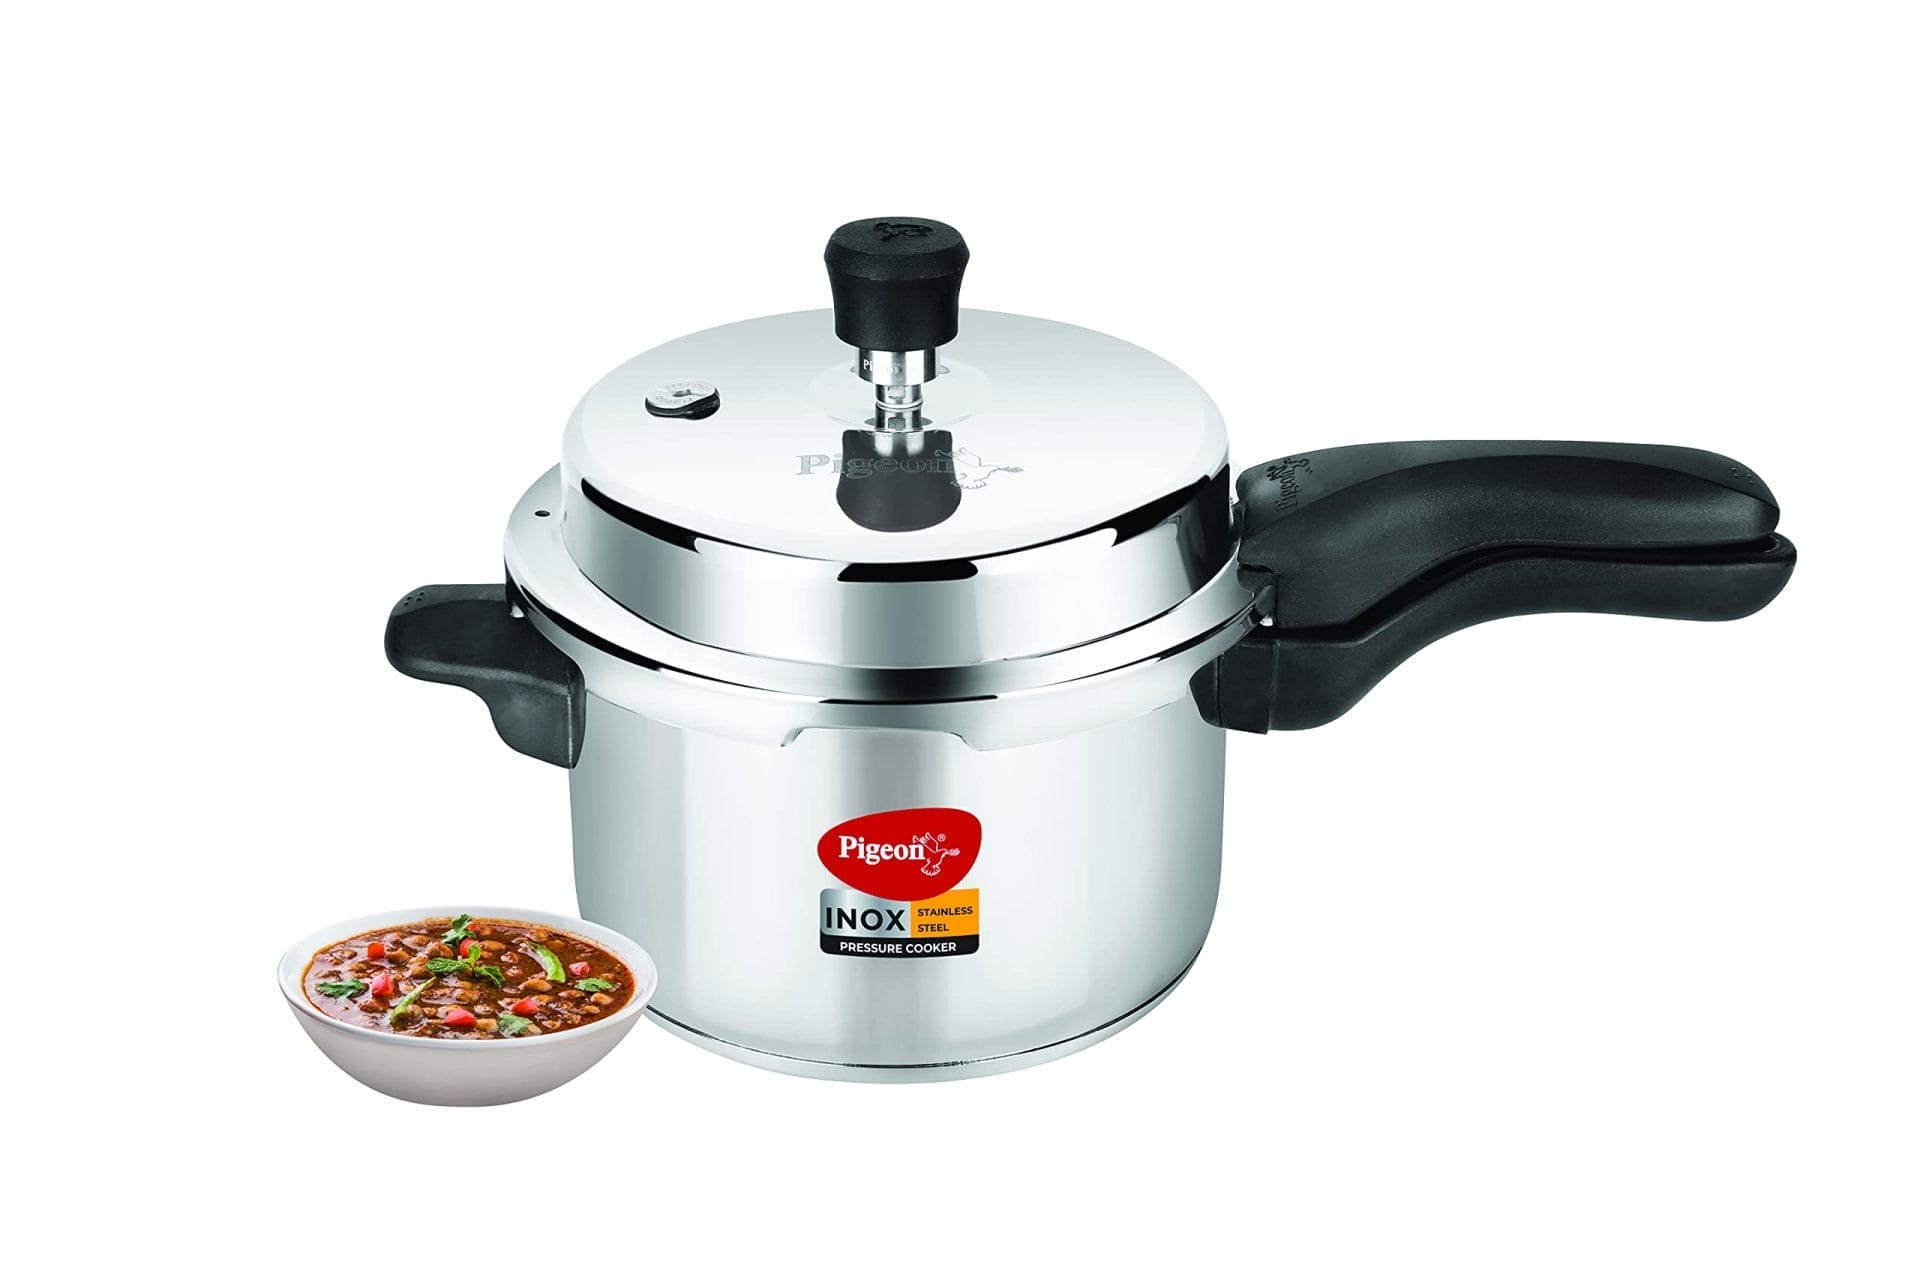 10 best stainless steel pressure cookers tested reviewed 1145 24 5